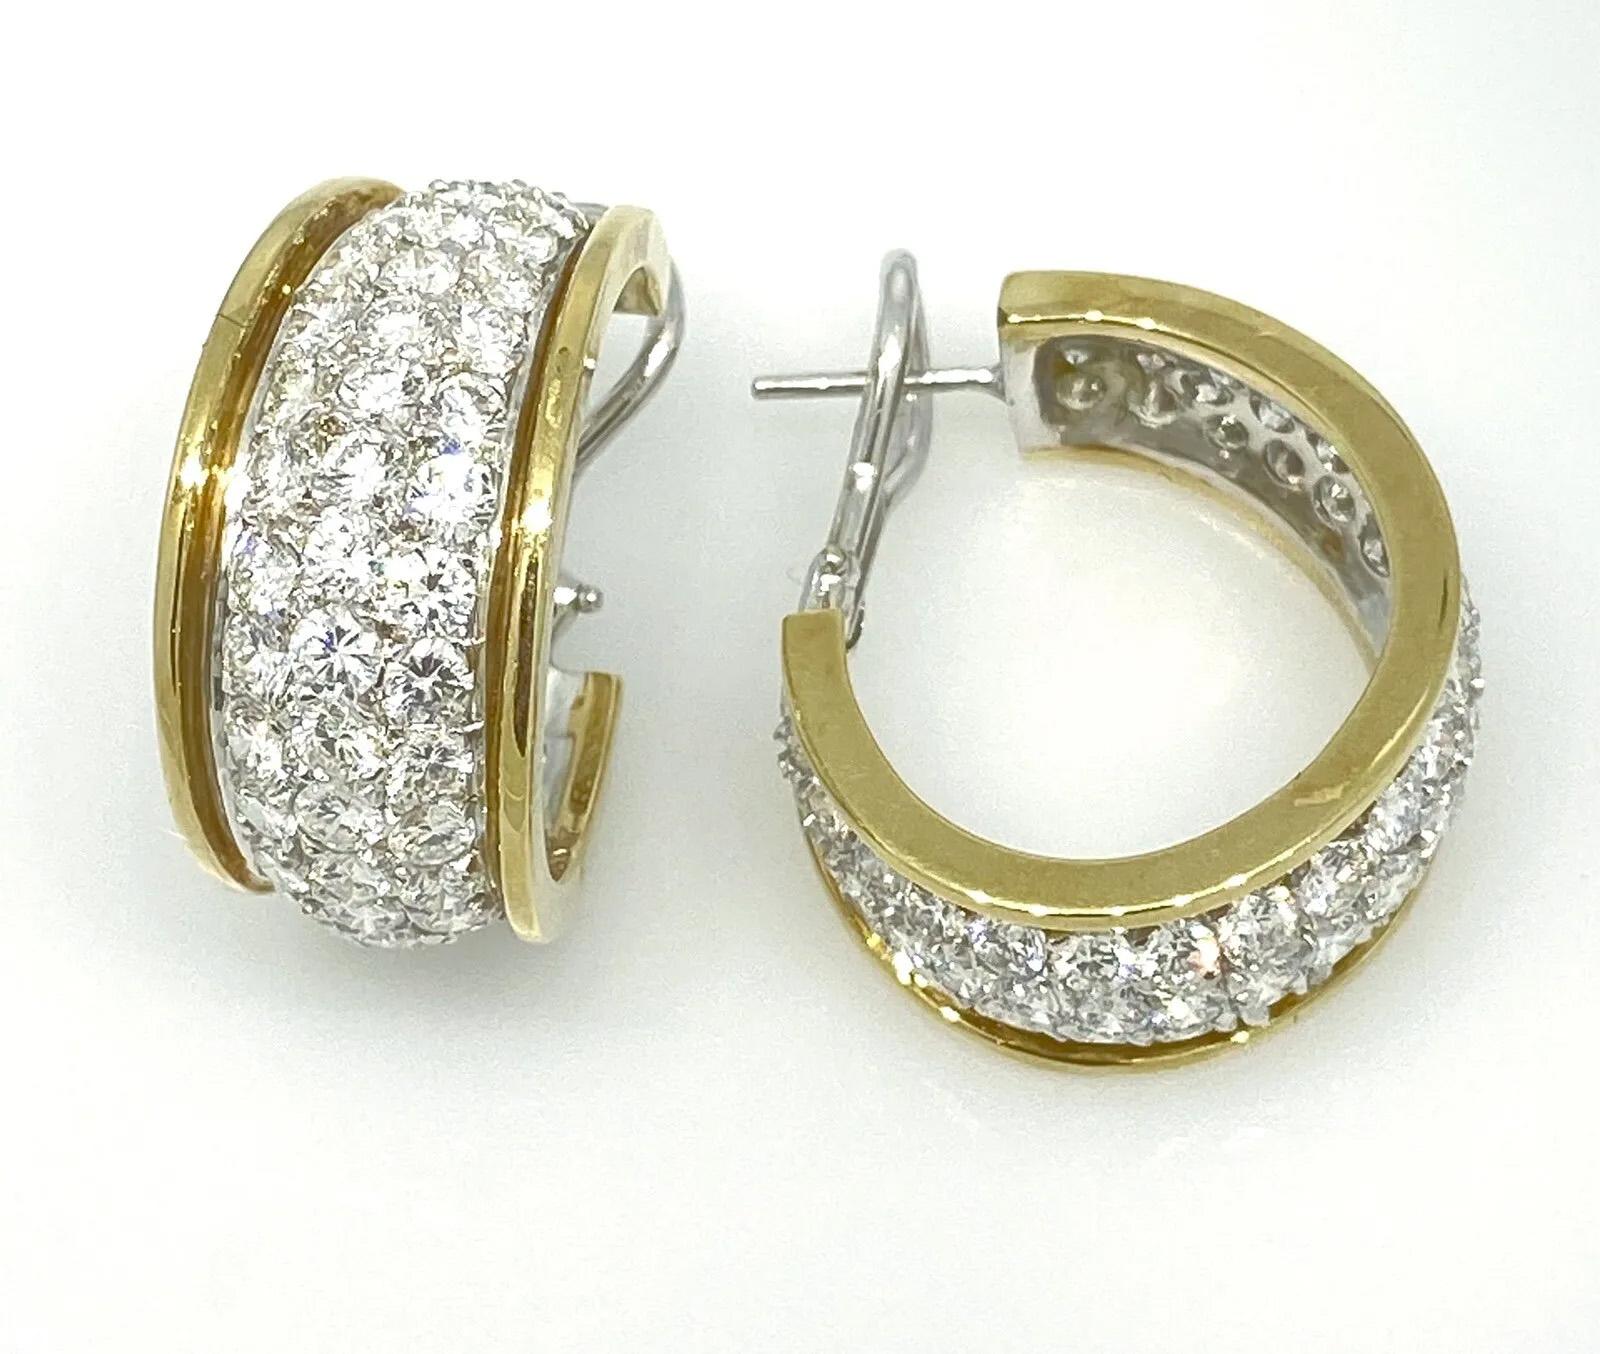 Pavé Diamond Hoop Earrings 7.00 Carat Total Weight in 18k Yellow Gold In Excellent Condition For Sale In La Jolla, CA